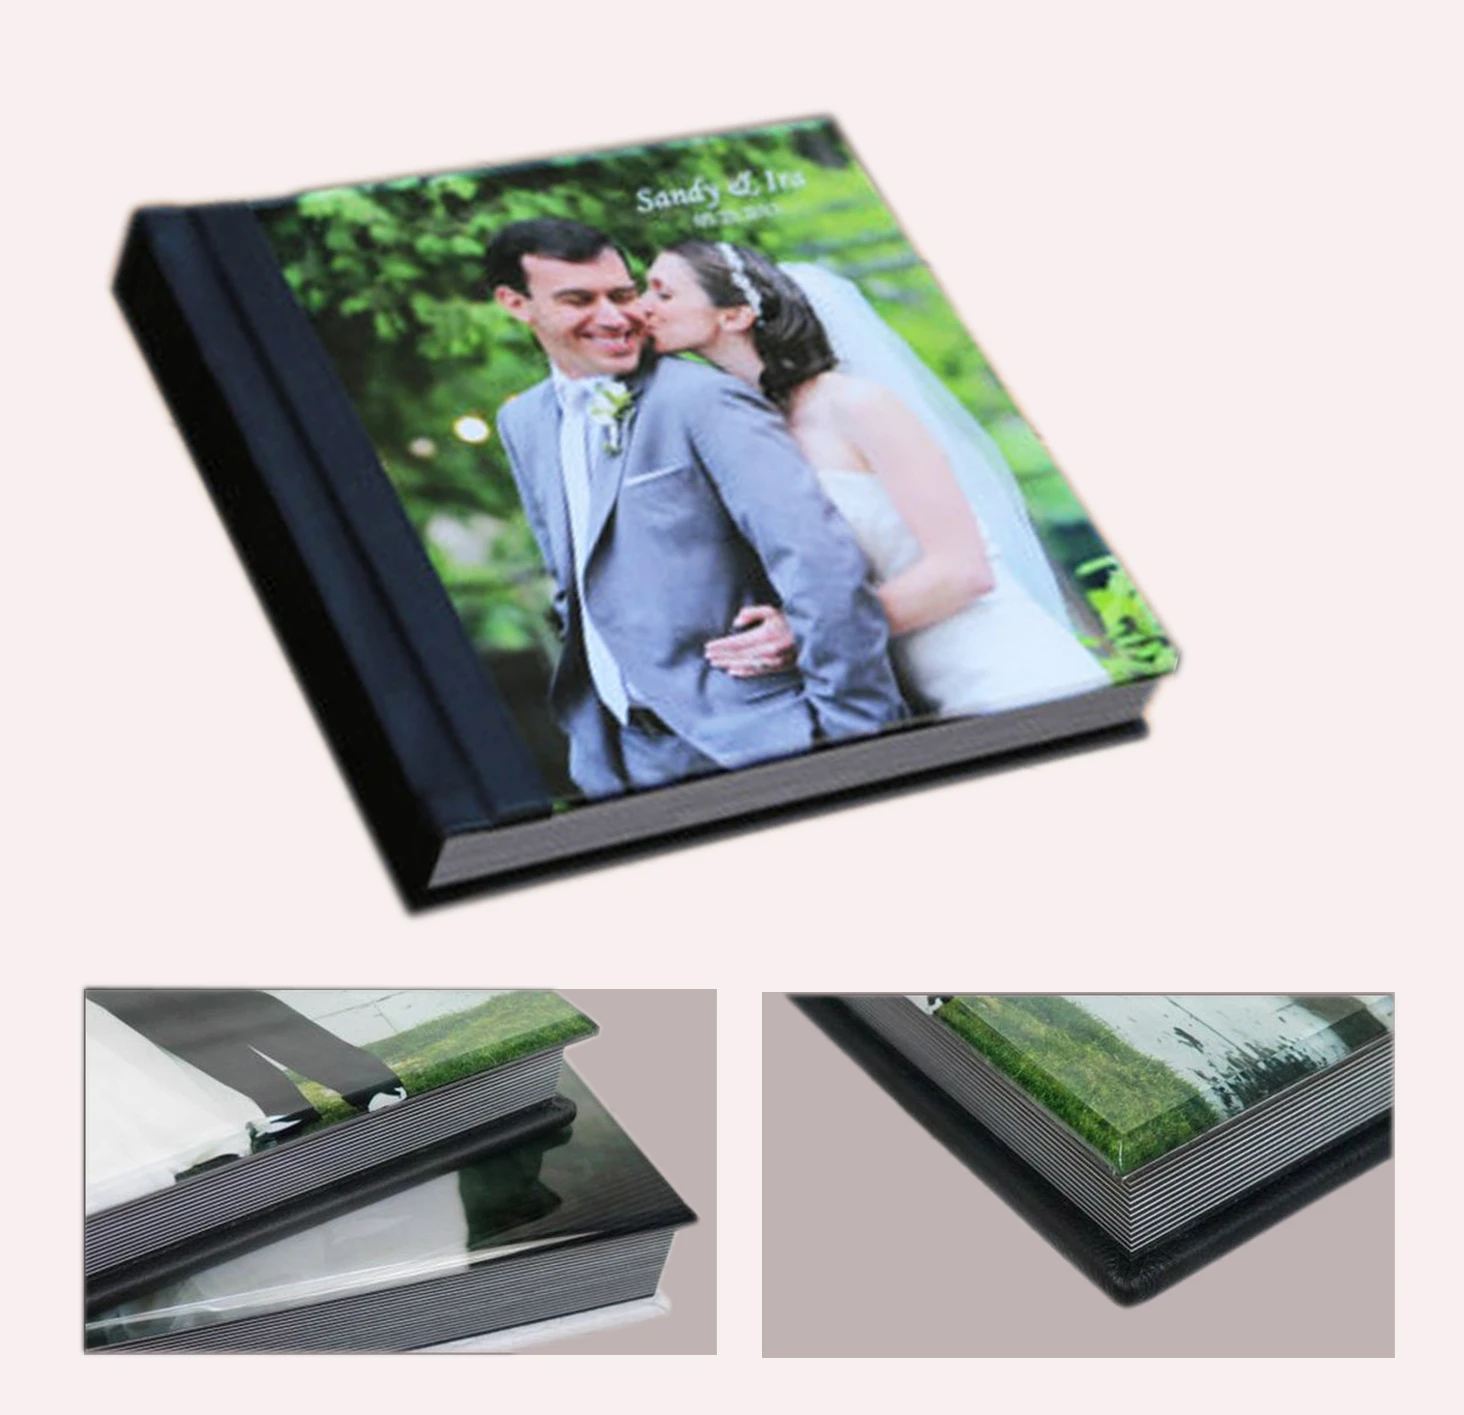 Ultra photo Albums Acrylic Albums And Wedding Albums Made With High Quality Acrylic